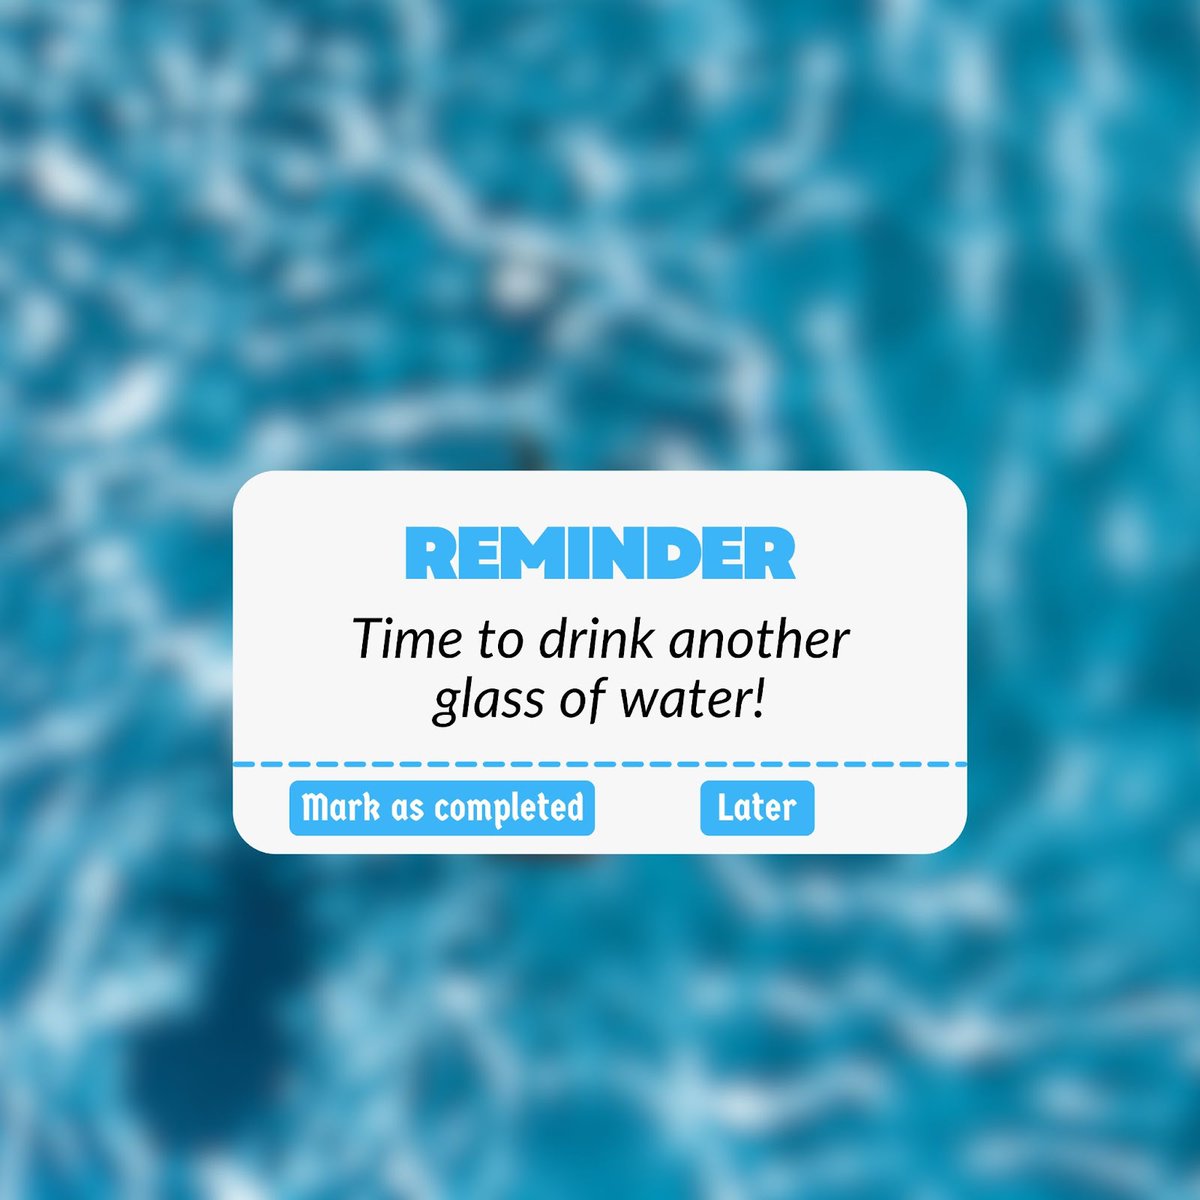 Hydration isn't just a task; it's a daily act of self-love. Set a reminder, take a sip, and feel the transformative power of water.
.
Your body deserves this daily ritual – a moment to refresh.
----
Learn more here, hydrasnooze.com!
.
#HydrationReminder